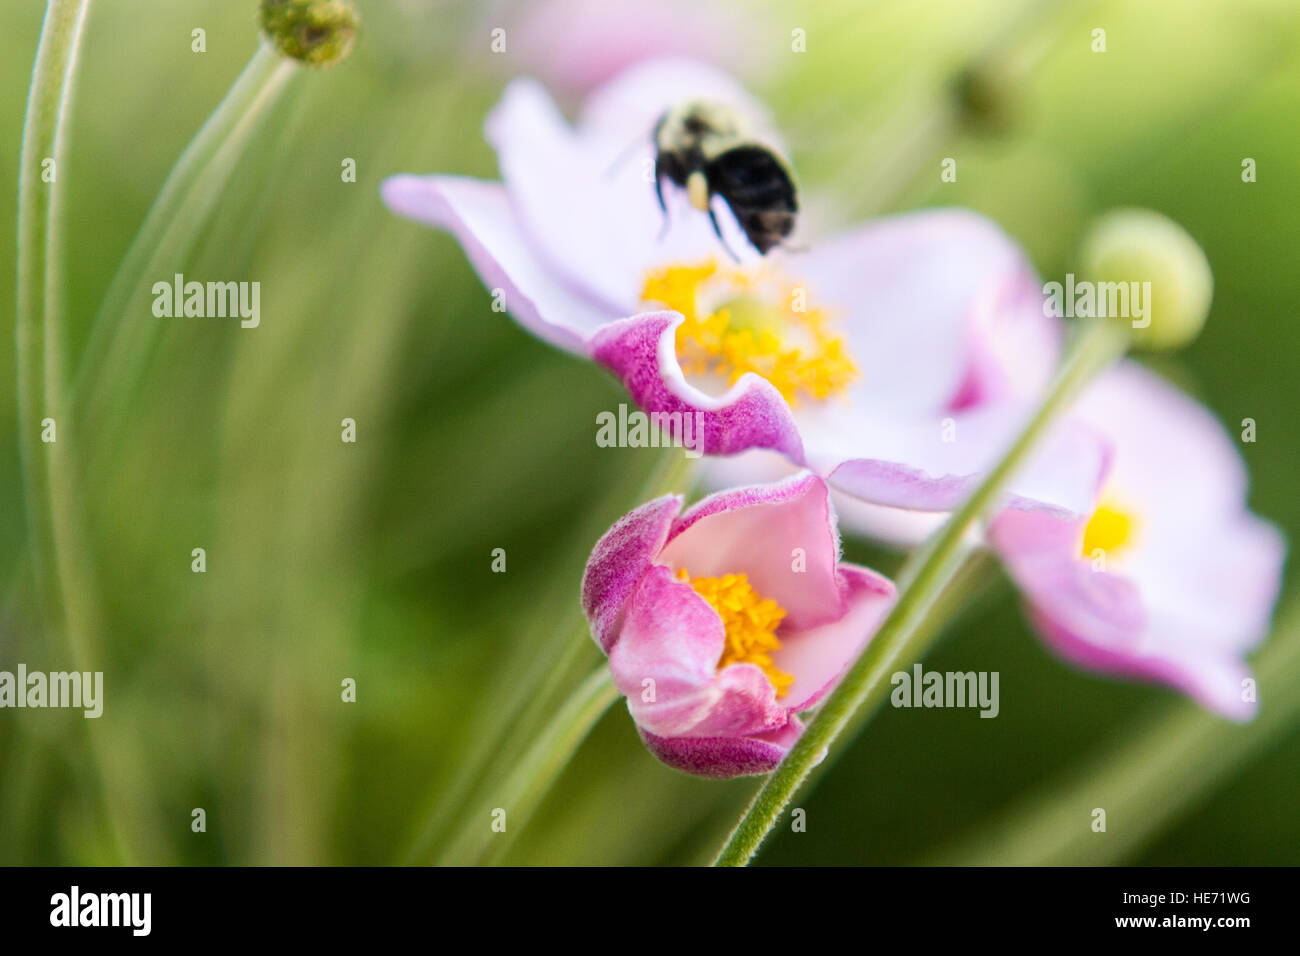 Bumble bee flying away from pink anemone flower bud Stock Photo